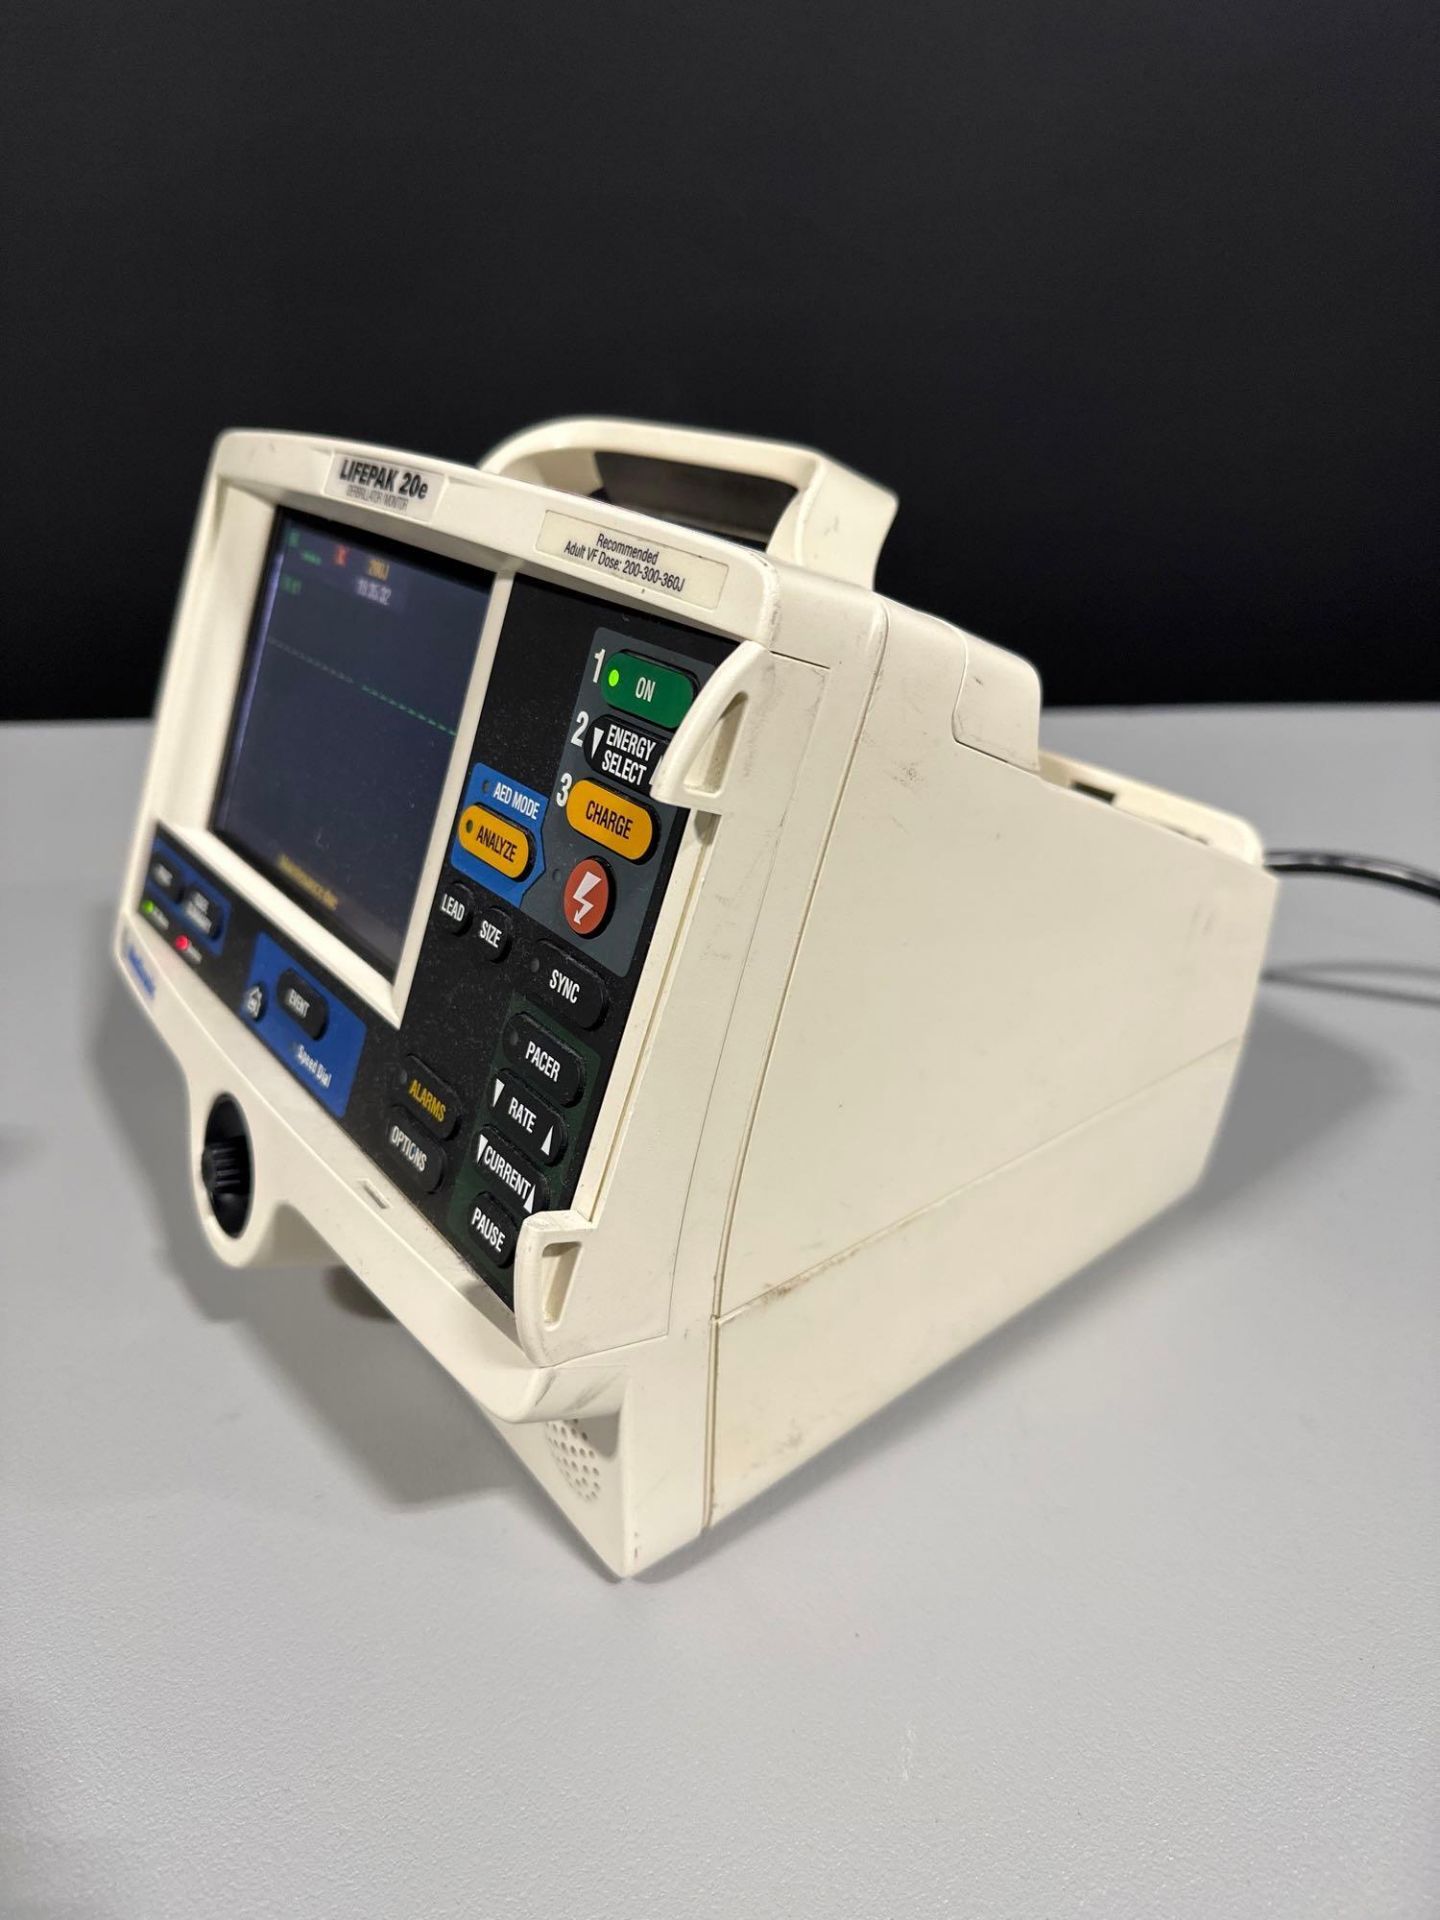 MEDTRONIC/PHYSIO CONTROL LIFEPAK 20E DEFIB WITH PACING, 3 LEAD ECG, ANALYZE (AED MODE) - Image 3 of 8